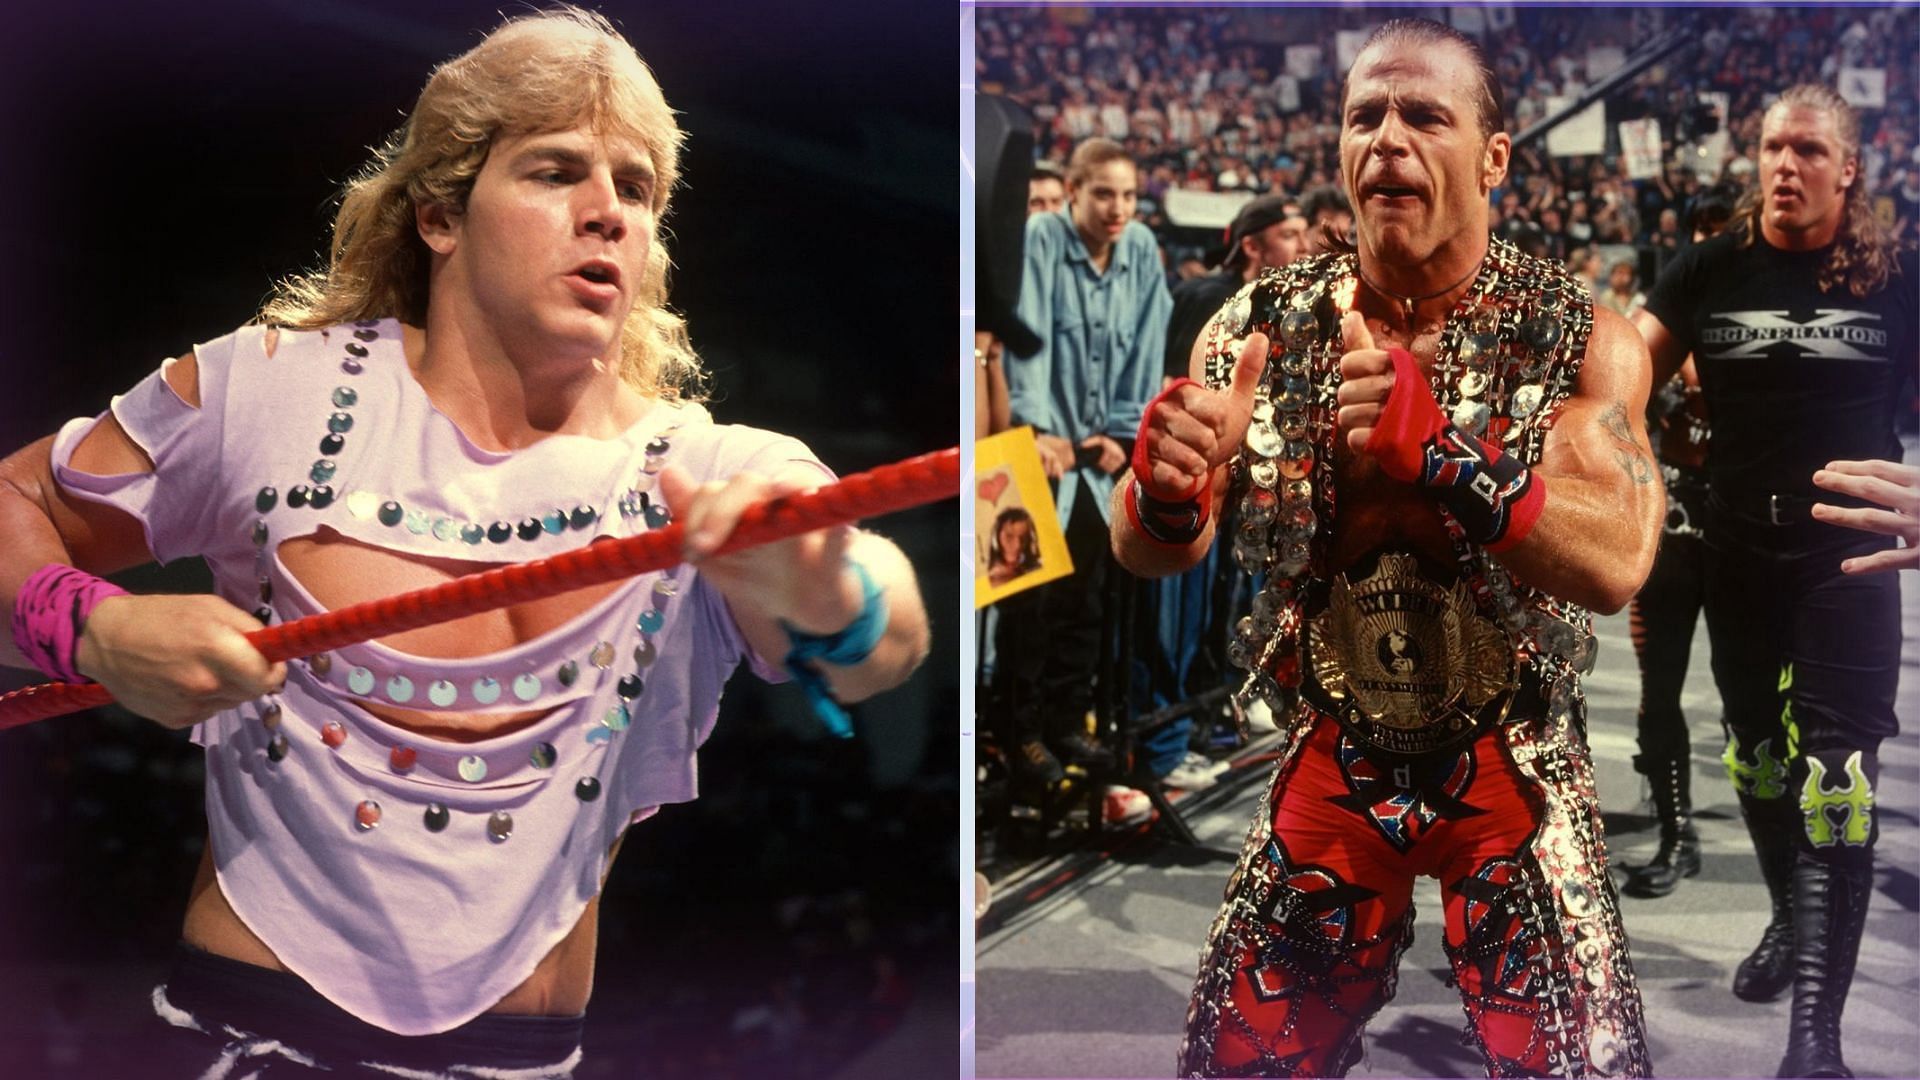 Former WWE Champion and Hall of Famer Shawn Michaels